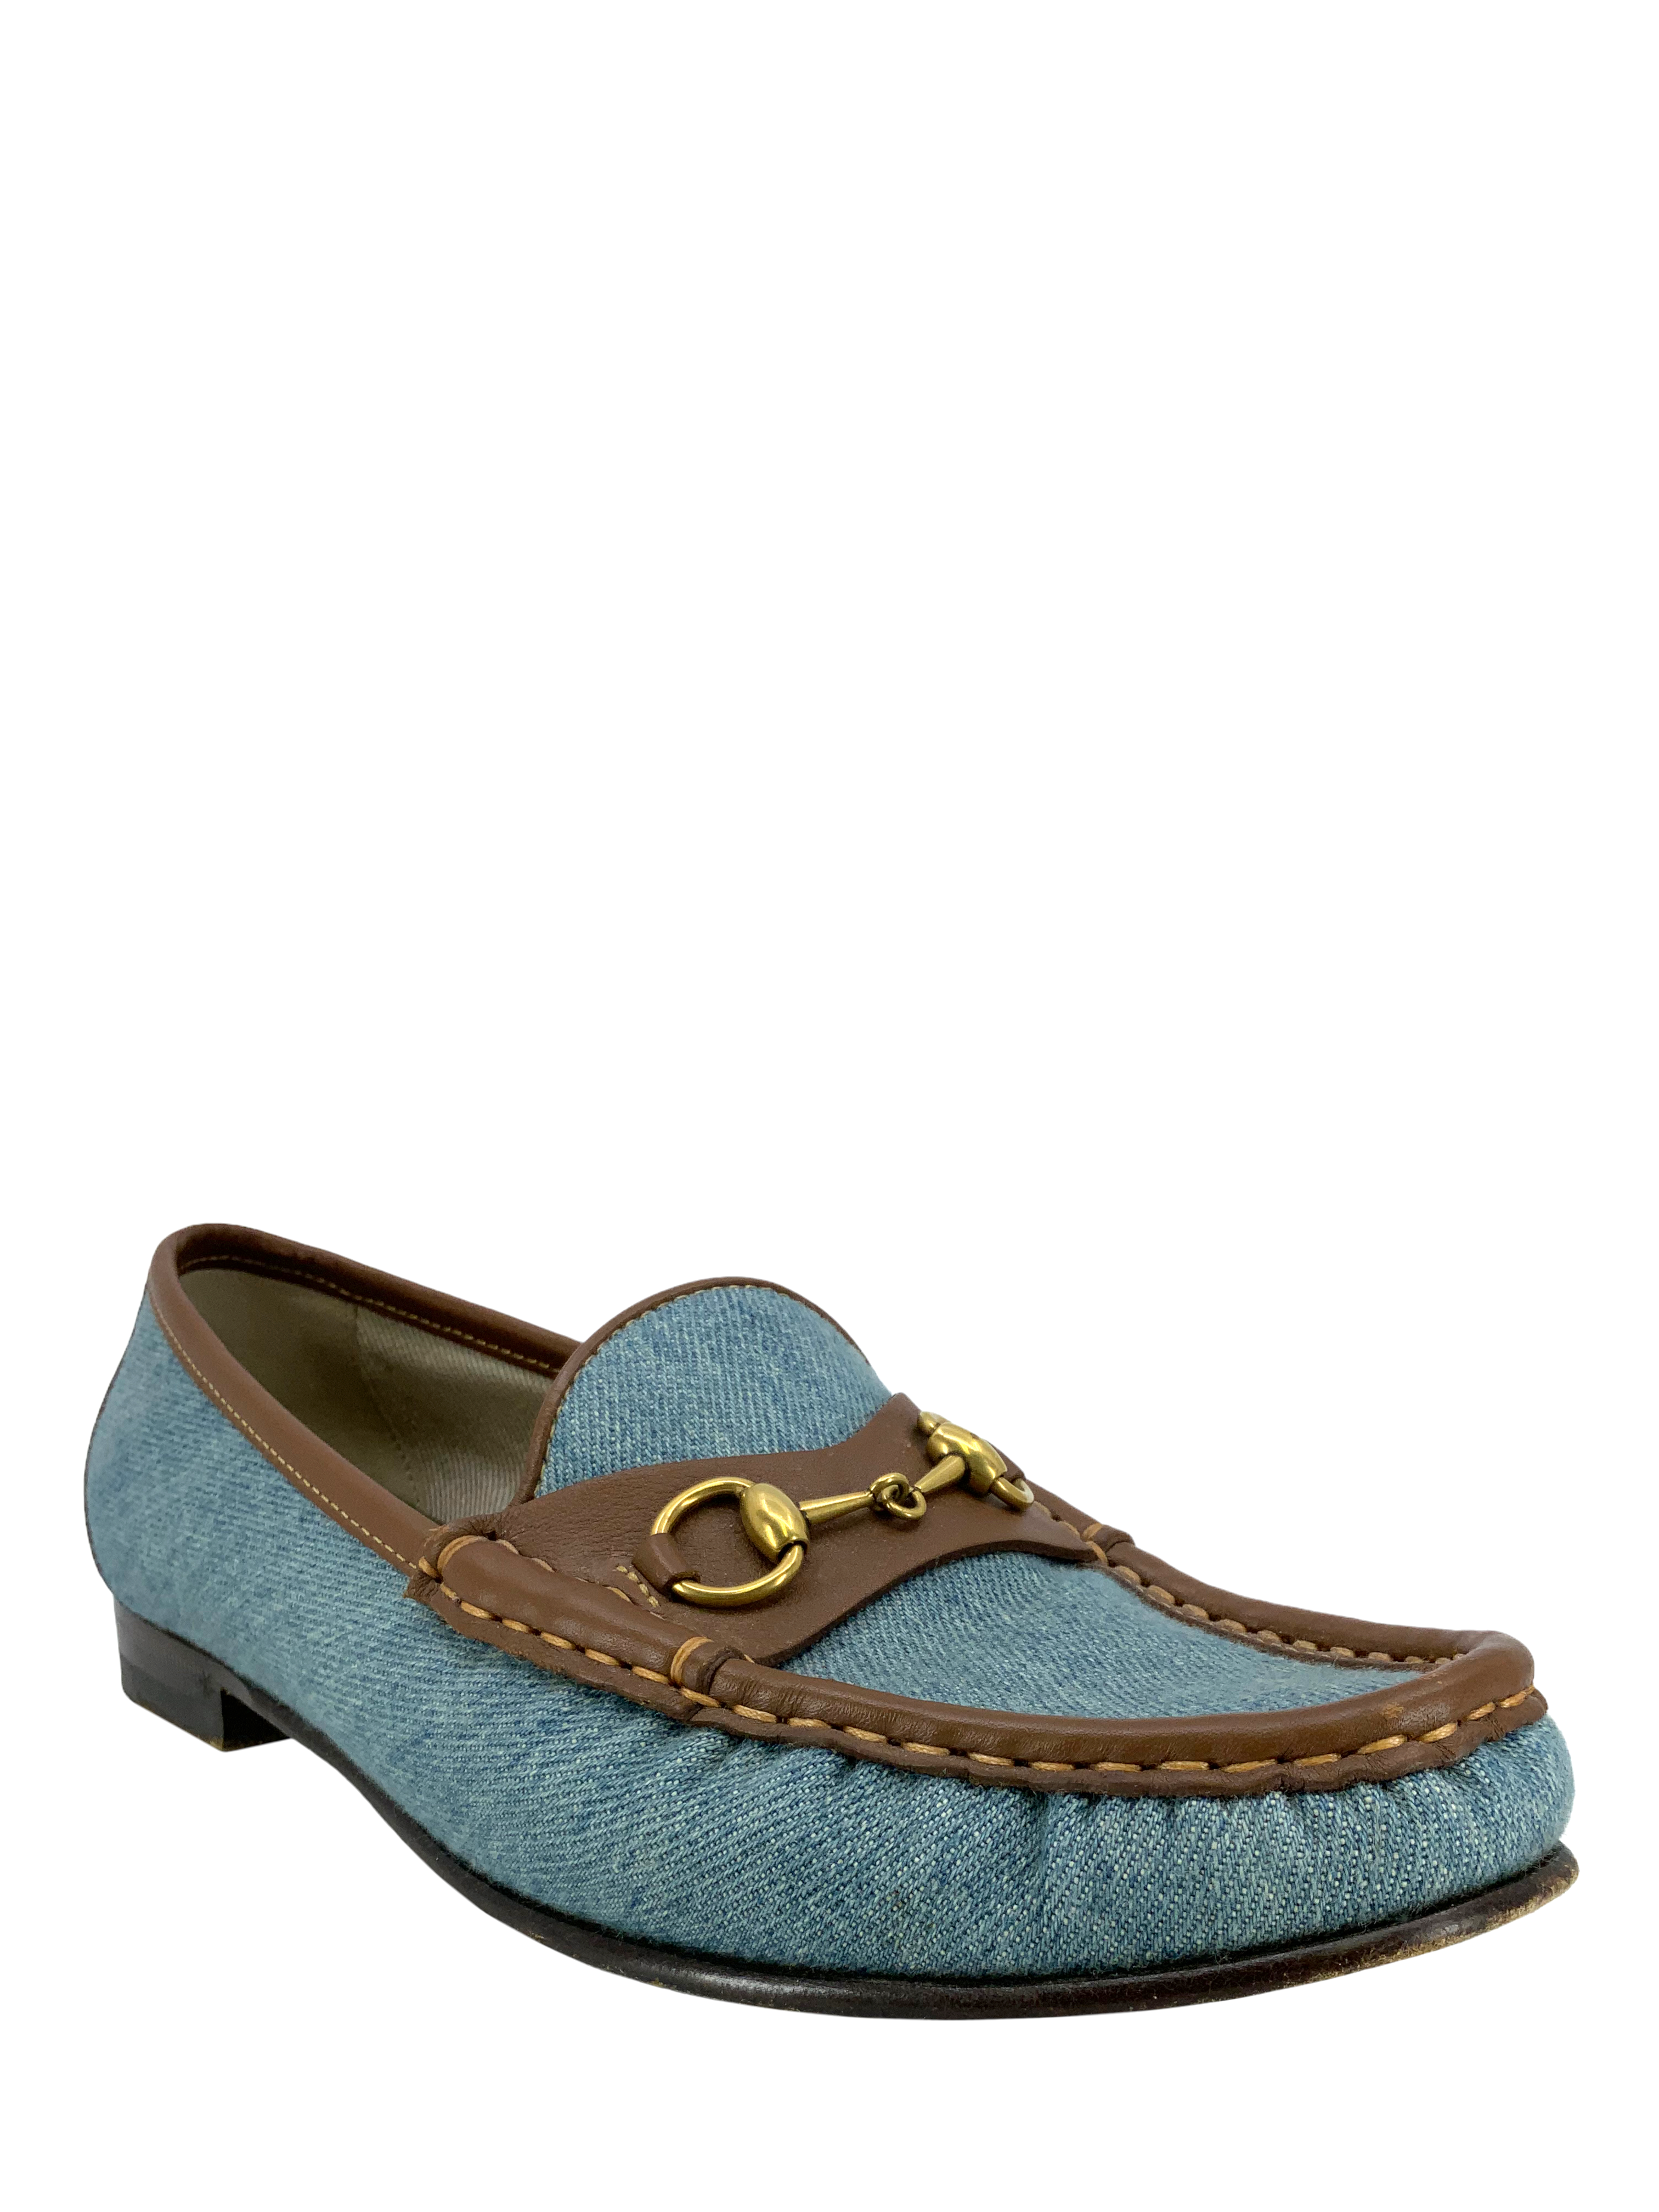 Gucci GG Marmont Denim Loafers in Blue